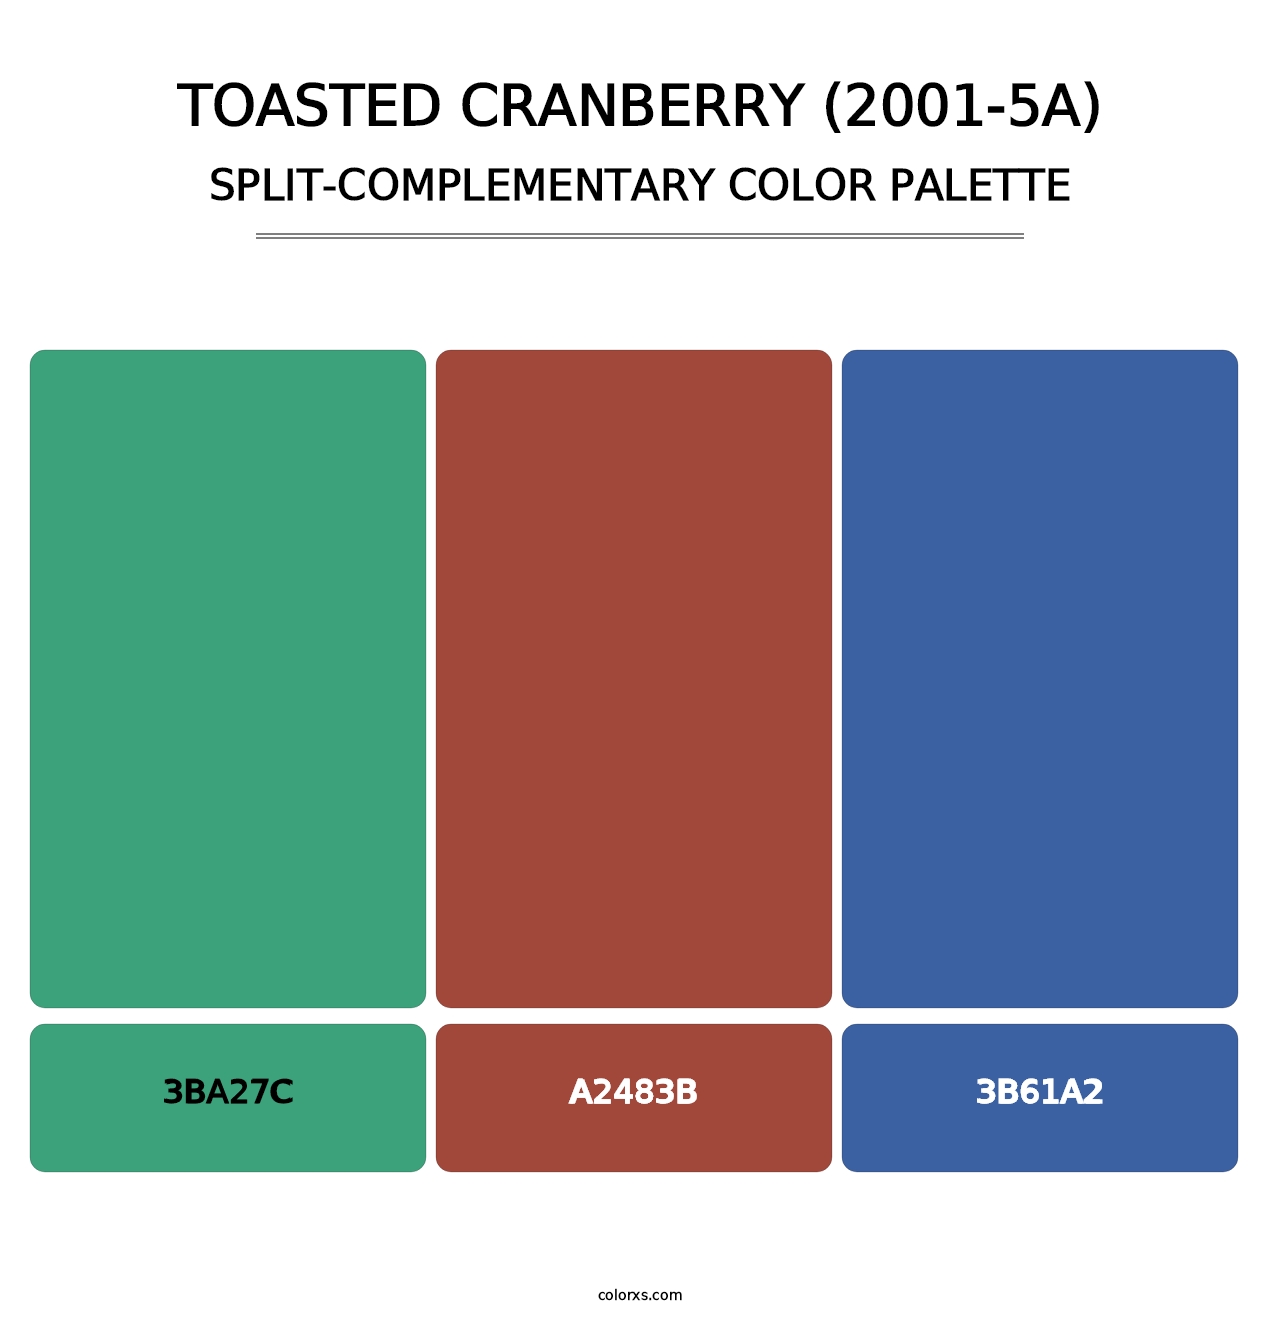 Toasted Cranberry (2001-5A) - Split-Complementary Color Palette